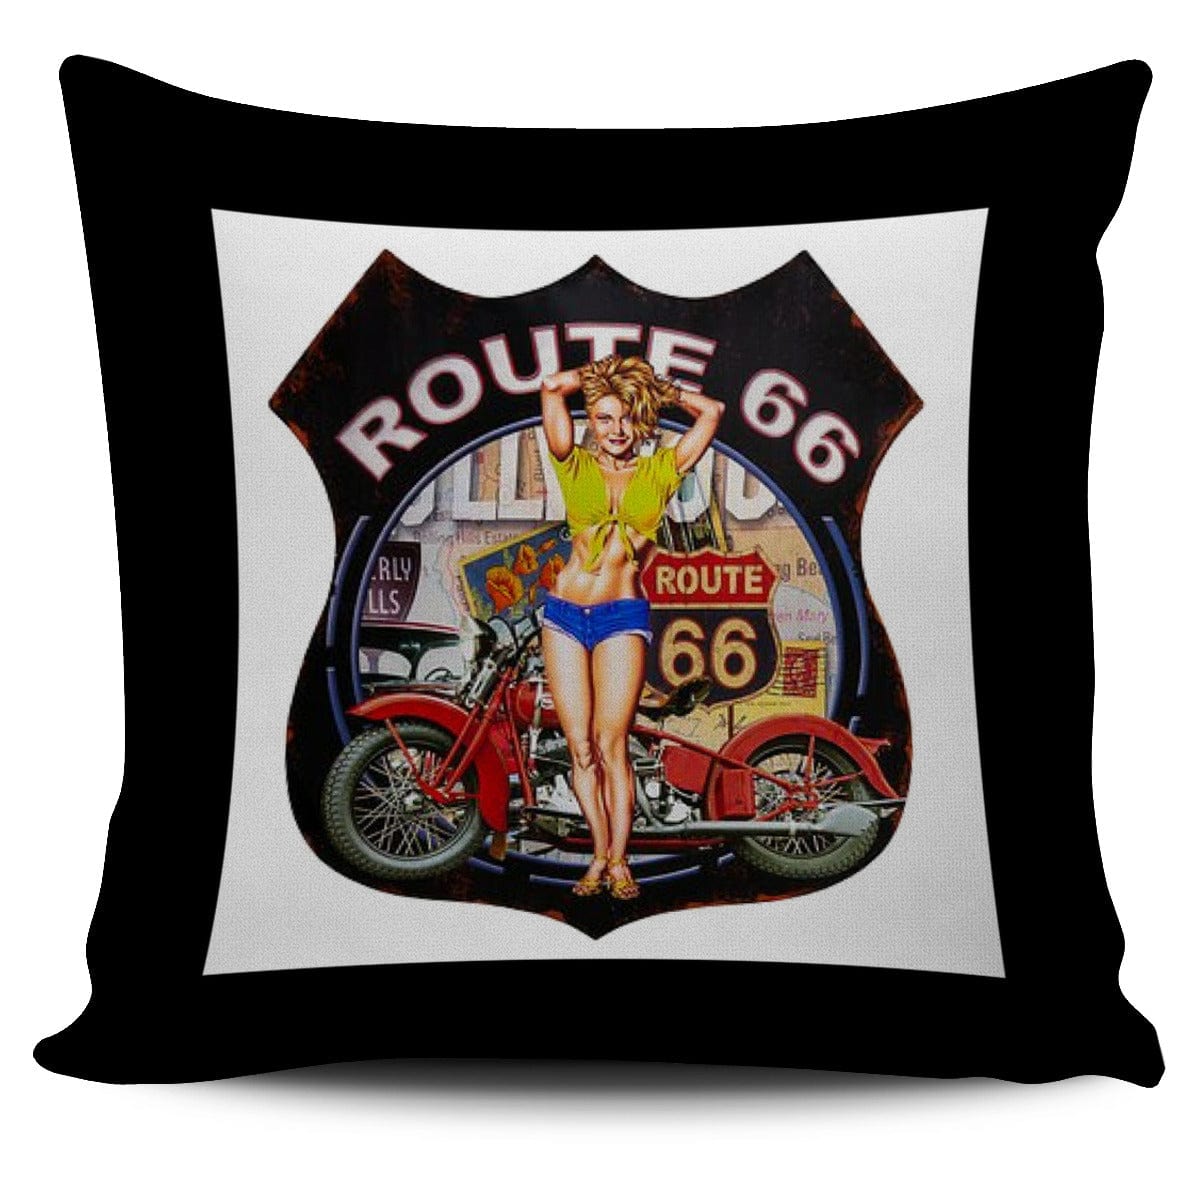 Pillow Covers - Route 66 Collection - GiddyGoatStore